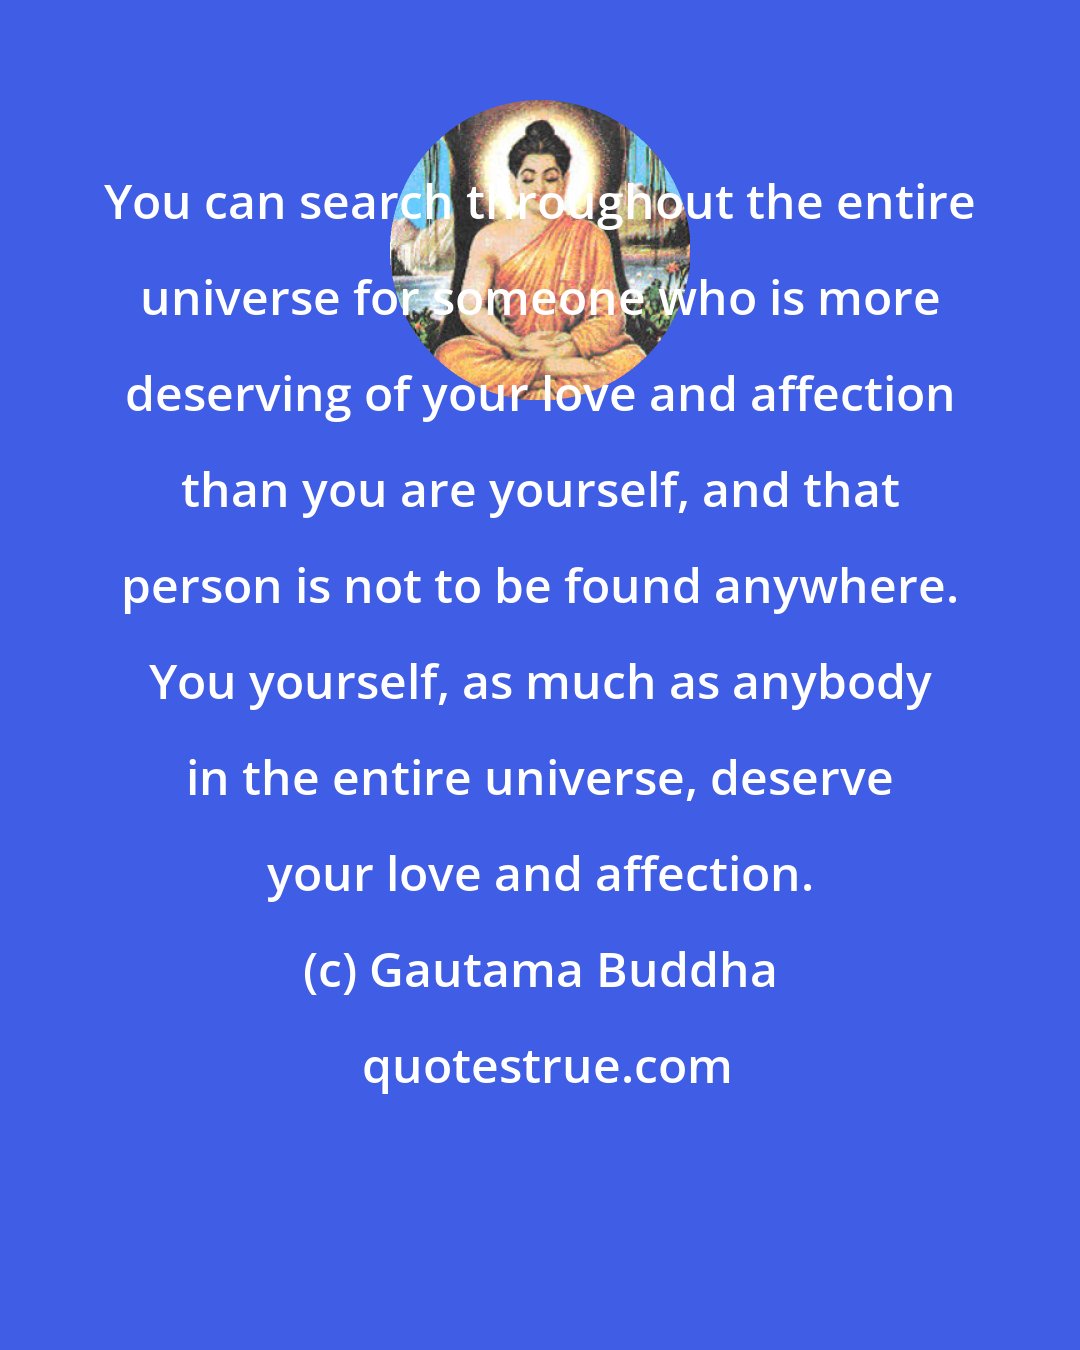 Gautama Buddha: You can search throughout the entire universe for someone who is more deserving of your love and affection than you are yourself, and that person is not to be found anywhere. You yourself, as much as anybody in the entire universe, deserve your love and affection.